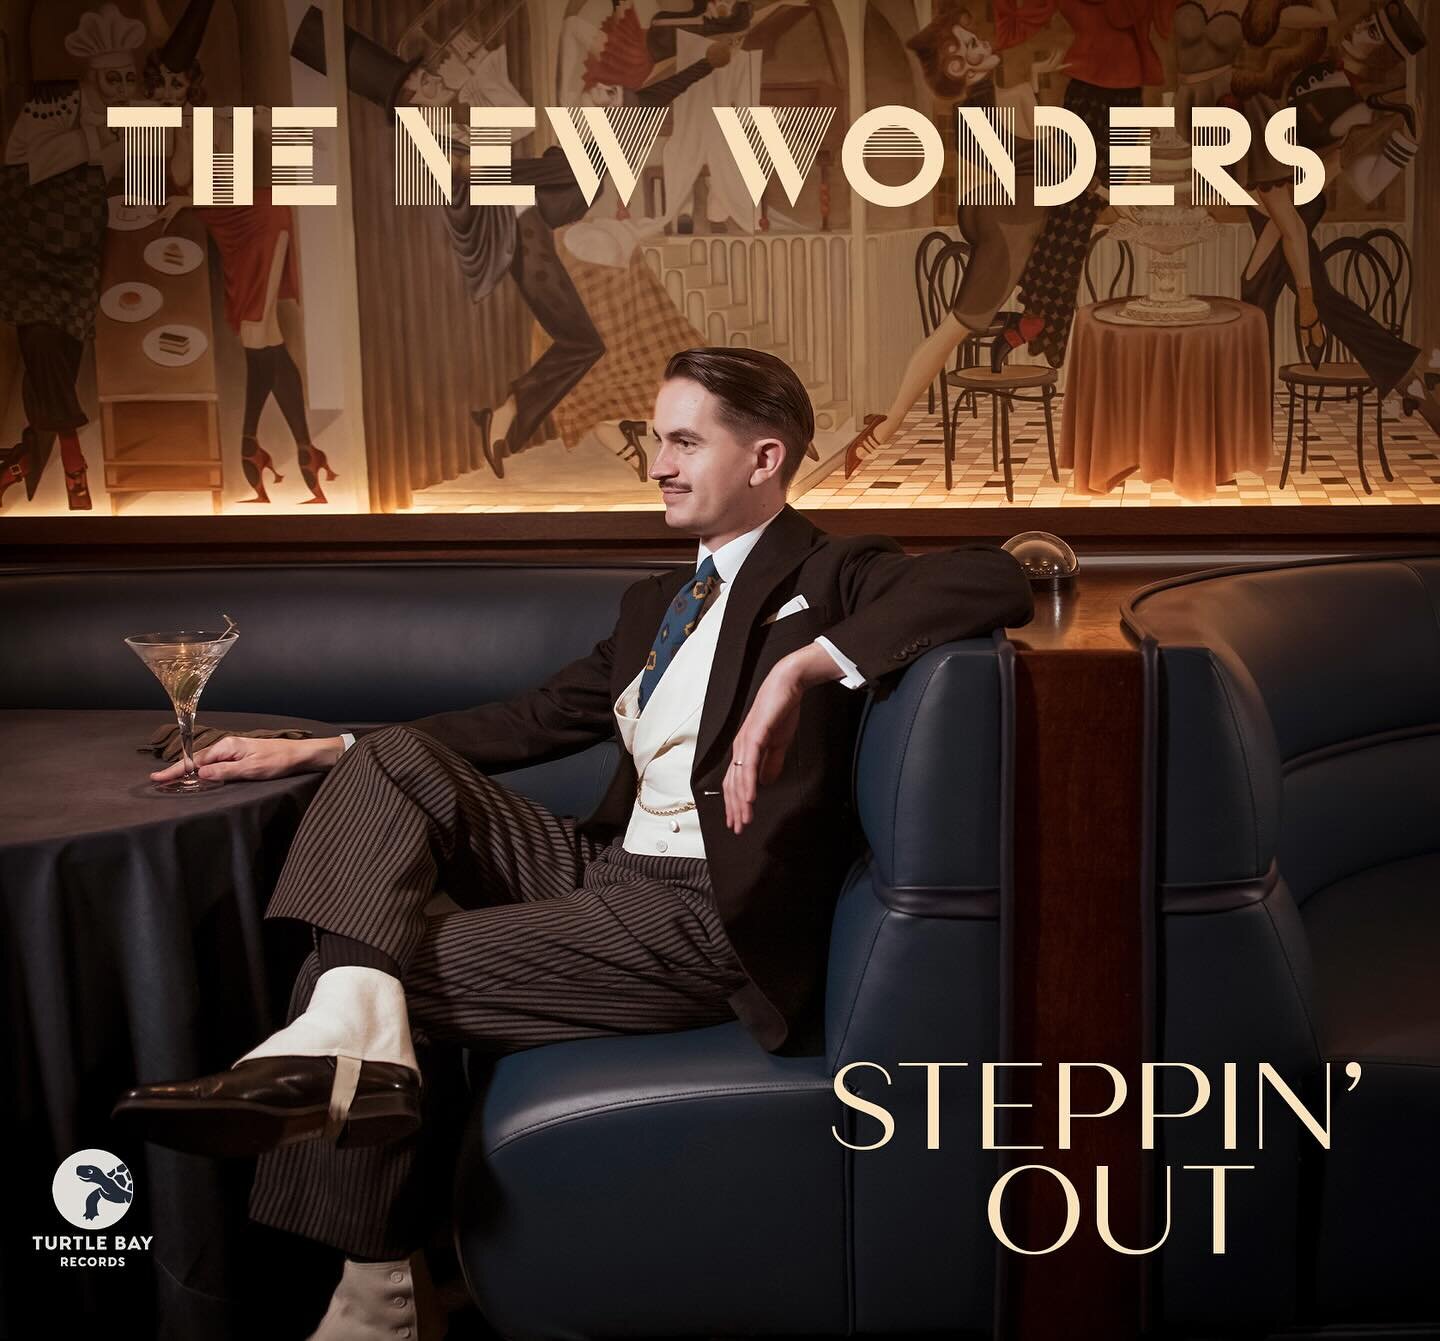 Finally!! @mikedavisjazz band The New Wonders album &ldquo;Steppin&rsquo; Out&rdquo; releases today!! Go to turtlebayrecords.com to buy the whole album 💫💫💫
.
.
.
.
#mikedavis #thenewwonders #turtlebayrecords #jazzmusician #nycjazz #jazzmusic #albu